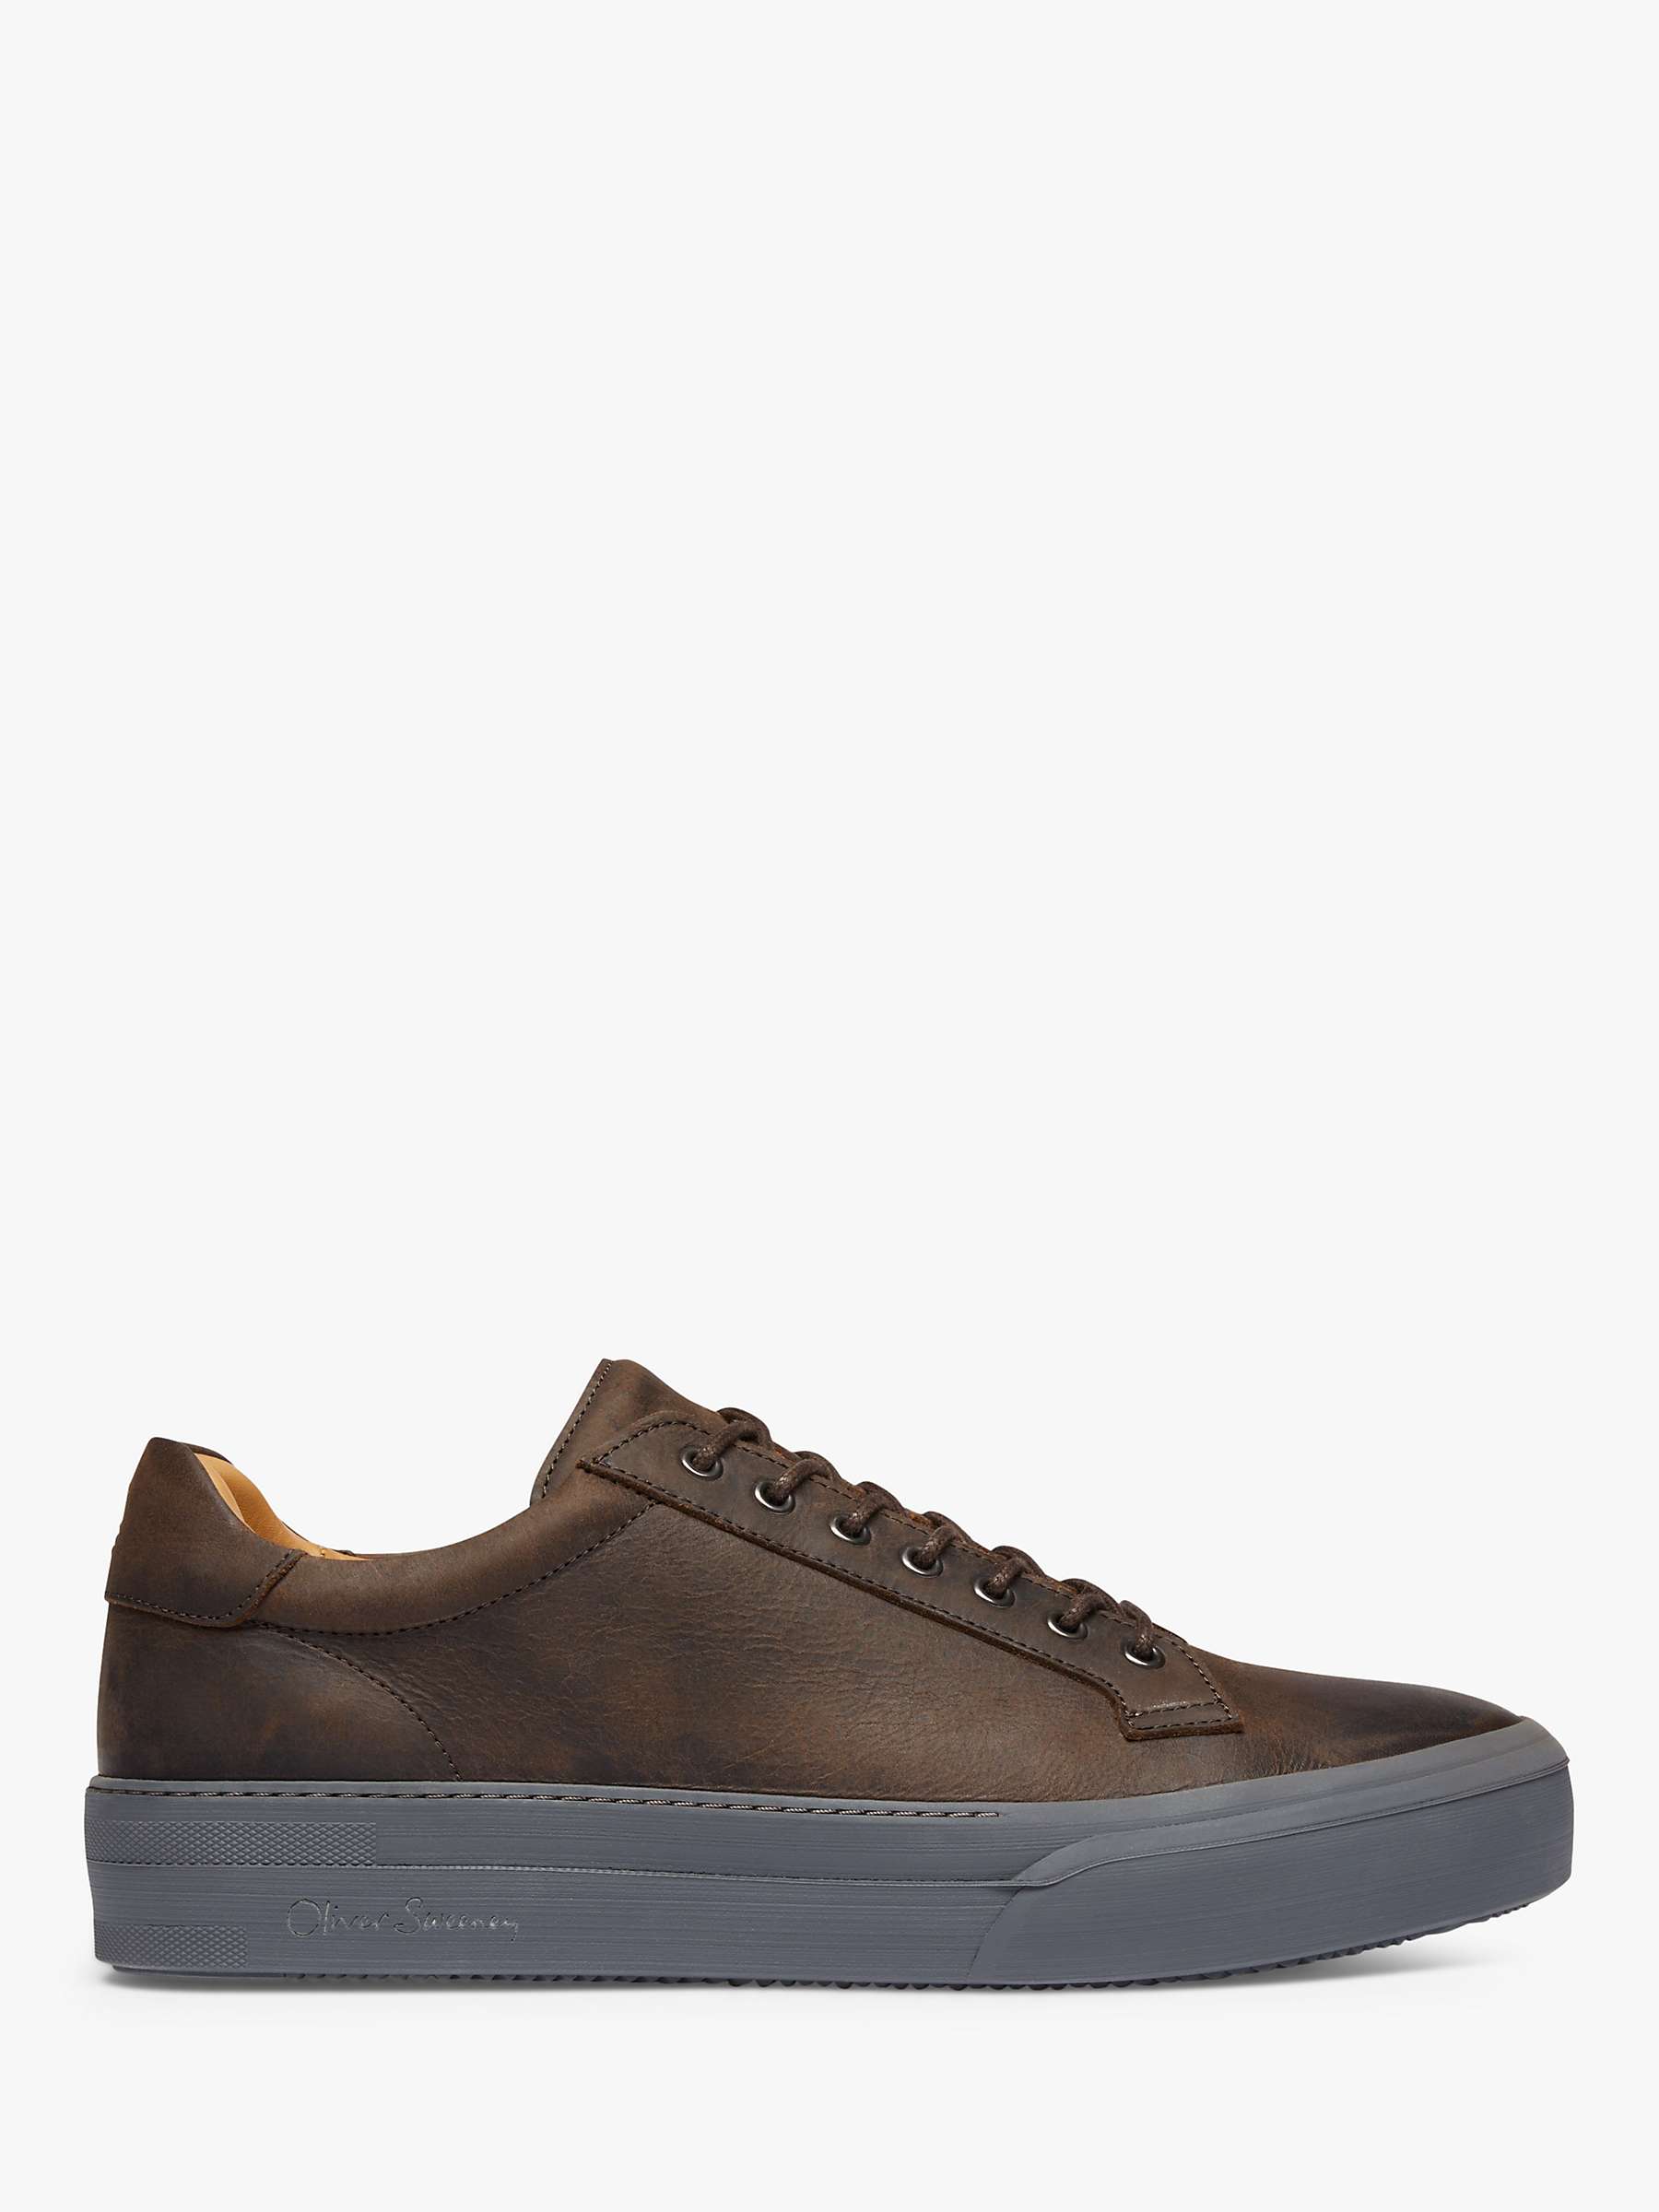 Buy Oliver Sweeney Penacova Leather Lace Up Trainers, Brown Online at johnlewis.com